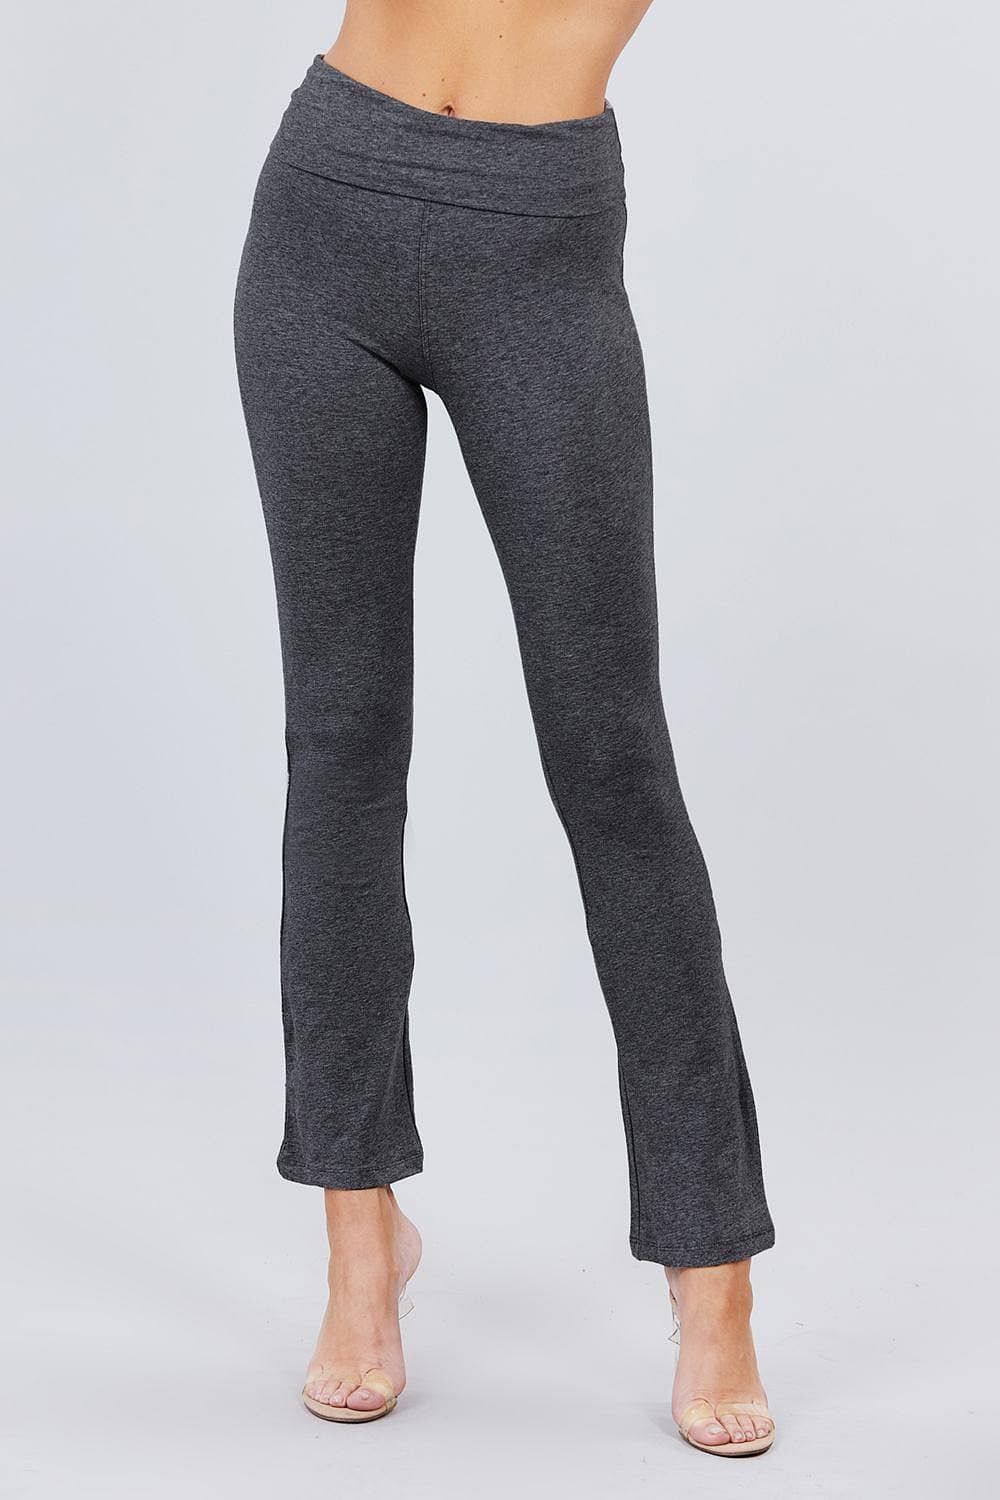 Charcoal Gray Women's Yoga Leggings - Shopping Therapy S Athletic Wear